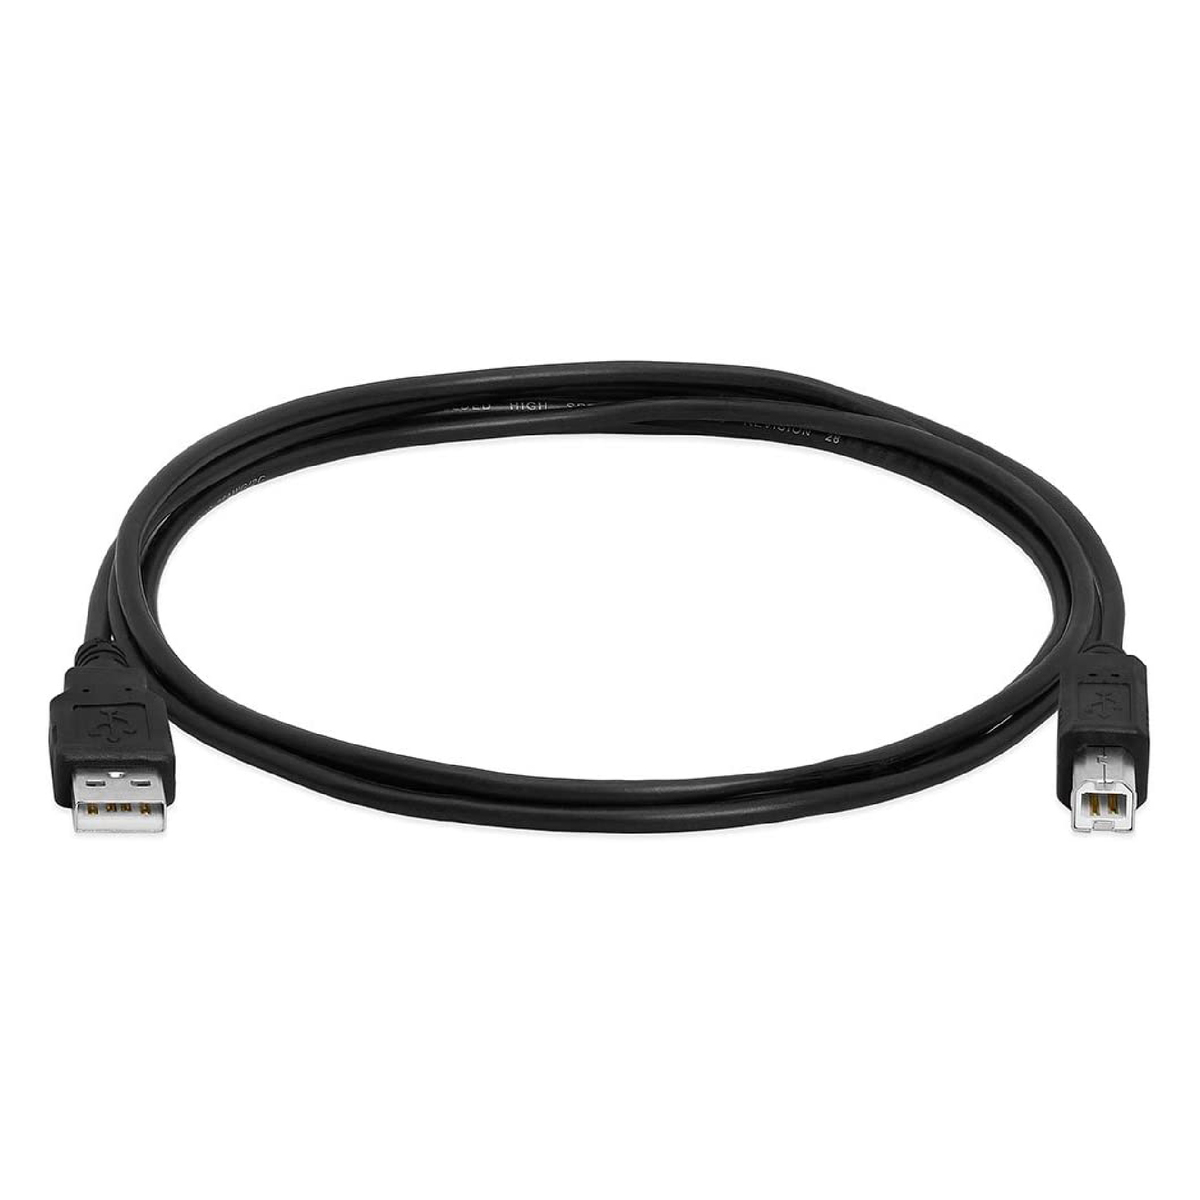 Iends USB 2.0 Printer Cable -A Male to B Male,1.8 Meter Assorted